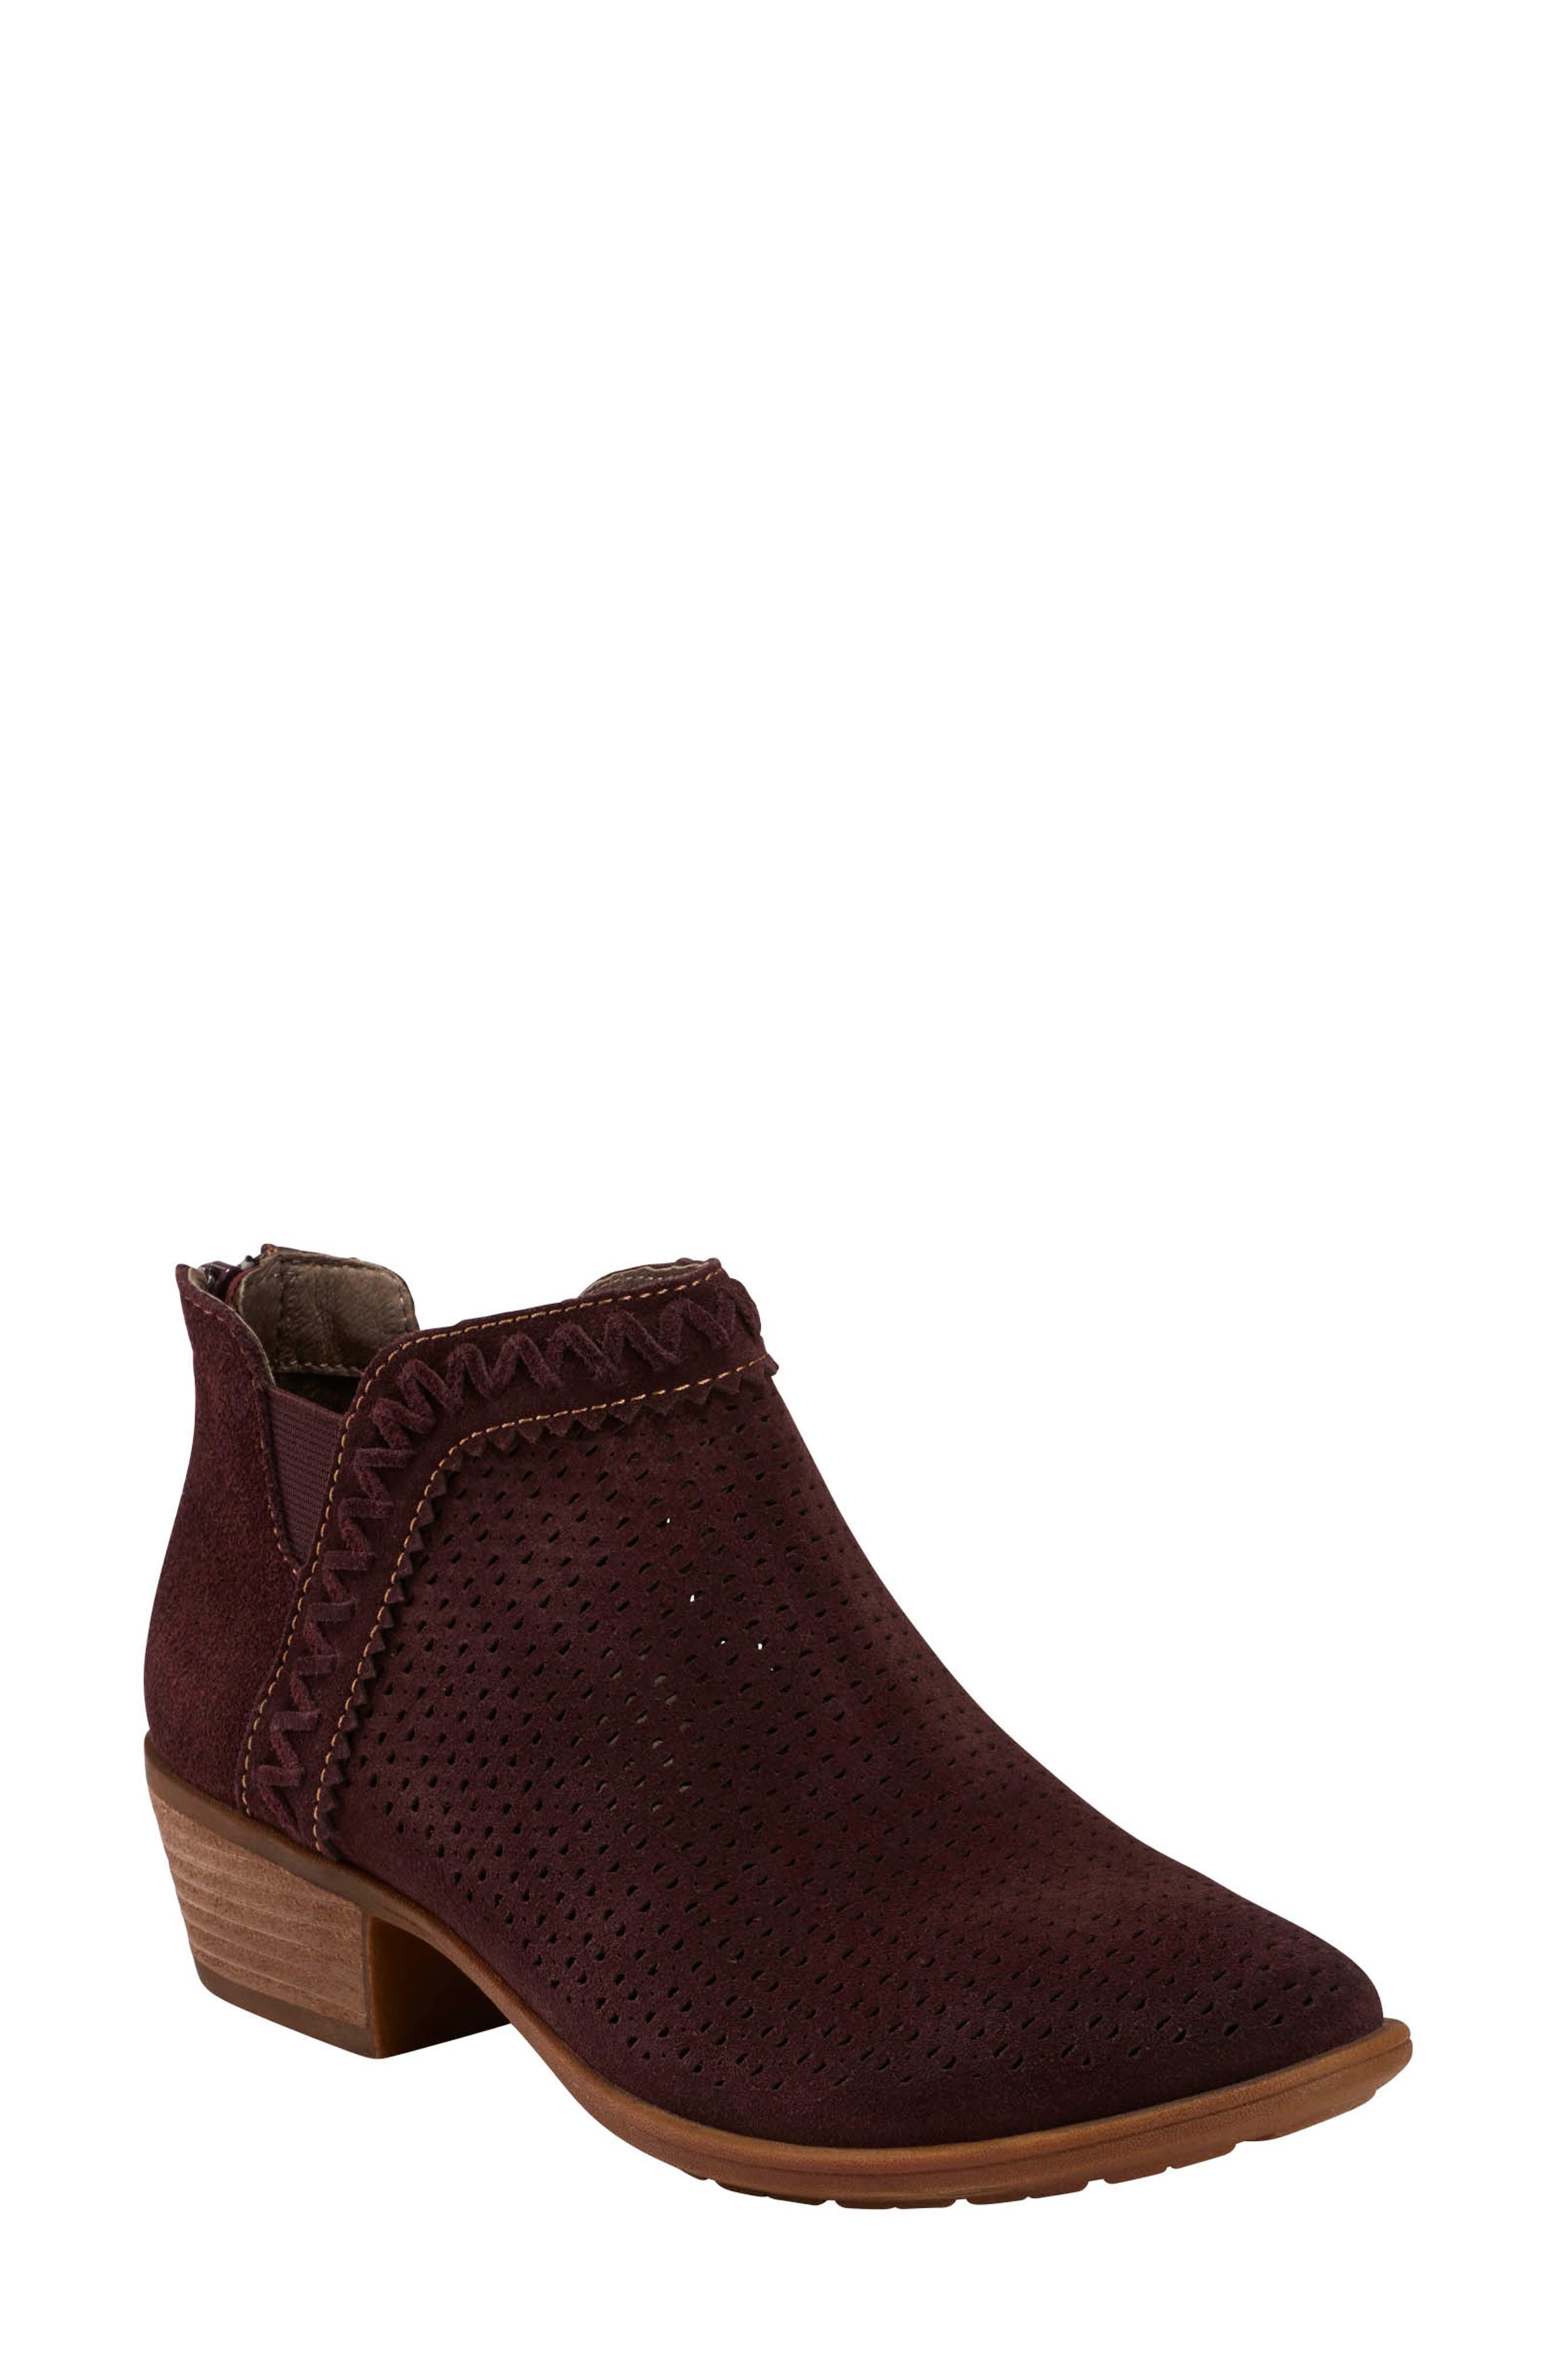 burgundy wide width shoes